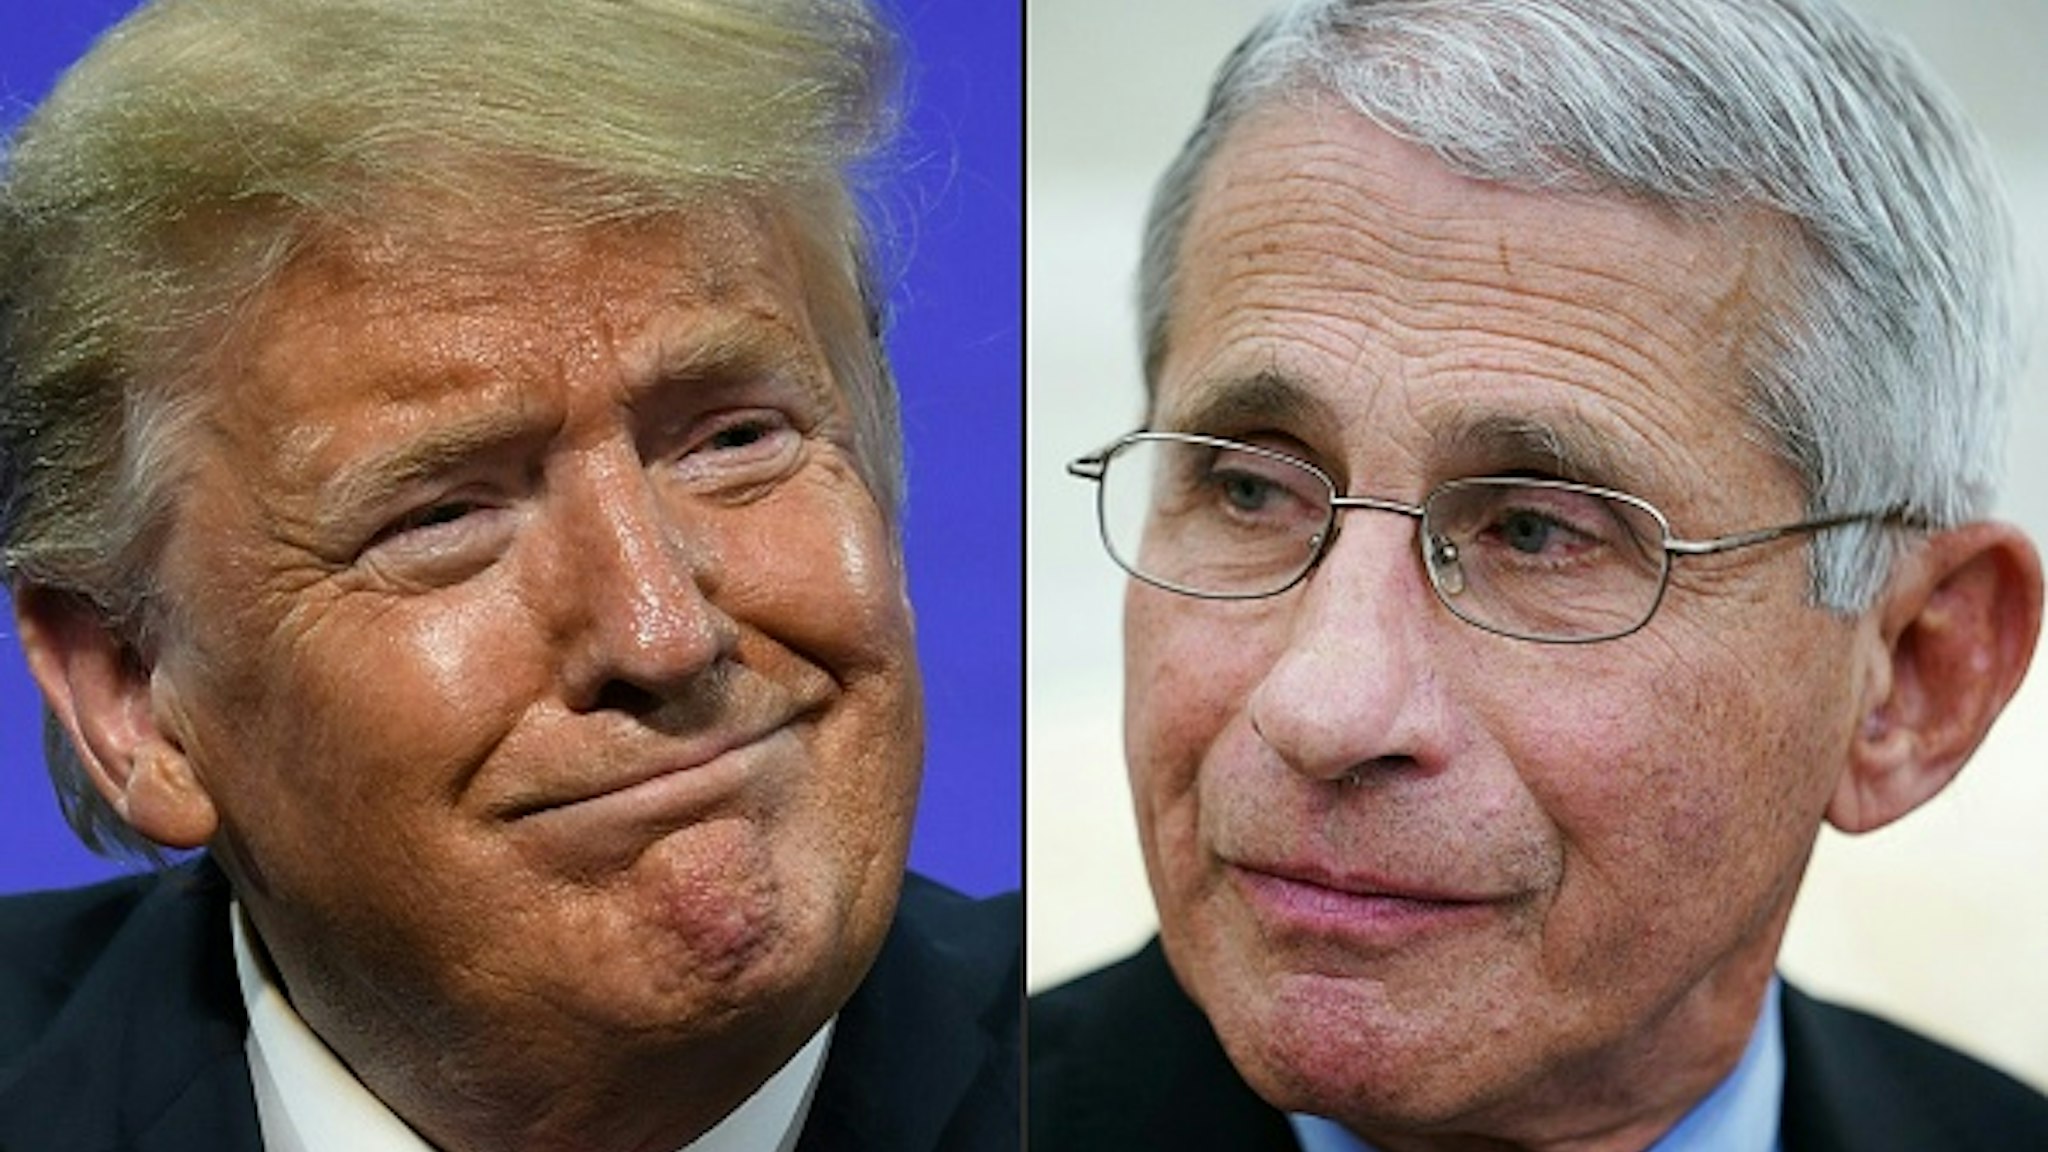 (COMBO) This combination of pictures created on July 13, 2020 shows US President Donald Trump in Phoenix, Arizona, June 23, 2020 and Anthony Fauci , director of the National Institute of Allergy and Infectious Diseases in Washington, DC on April 29, 2020. - As Florida reports a record surge of deaths due to COVID-19, President Trump called out Dr. Fauci on Fox News for making "a lot of mistakes", while The White House stated "several White House officials are concerned about the number of times Dr. Fauci has been wrong on things". Fauci, for his part, has contradicted the President by saying that "the country is not doing well in comparison to other countries handling of the virus".